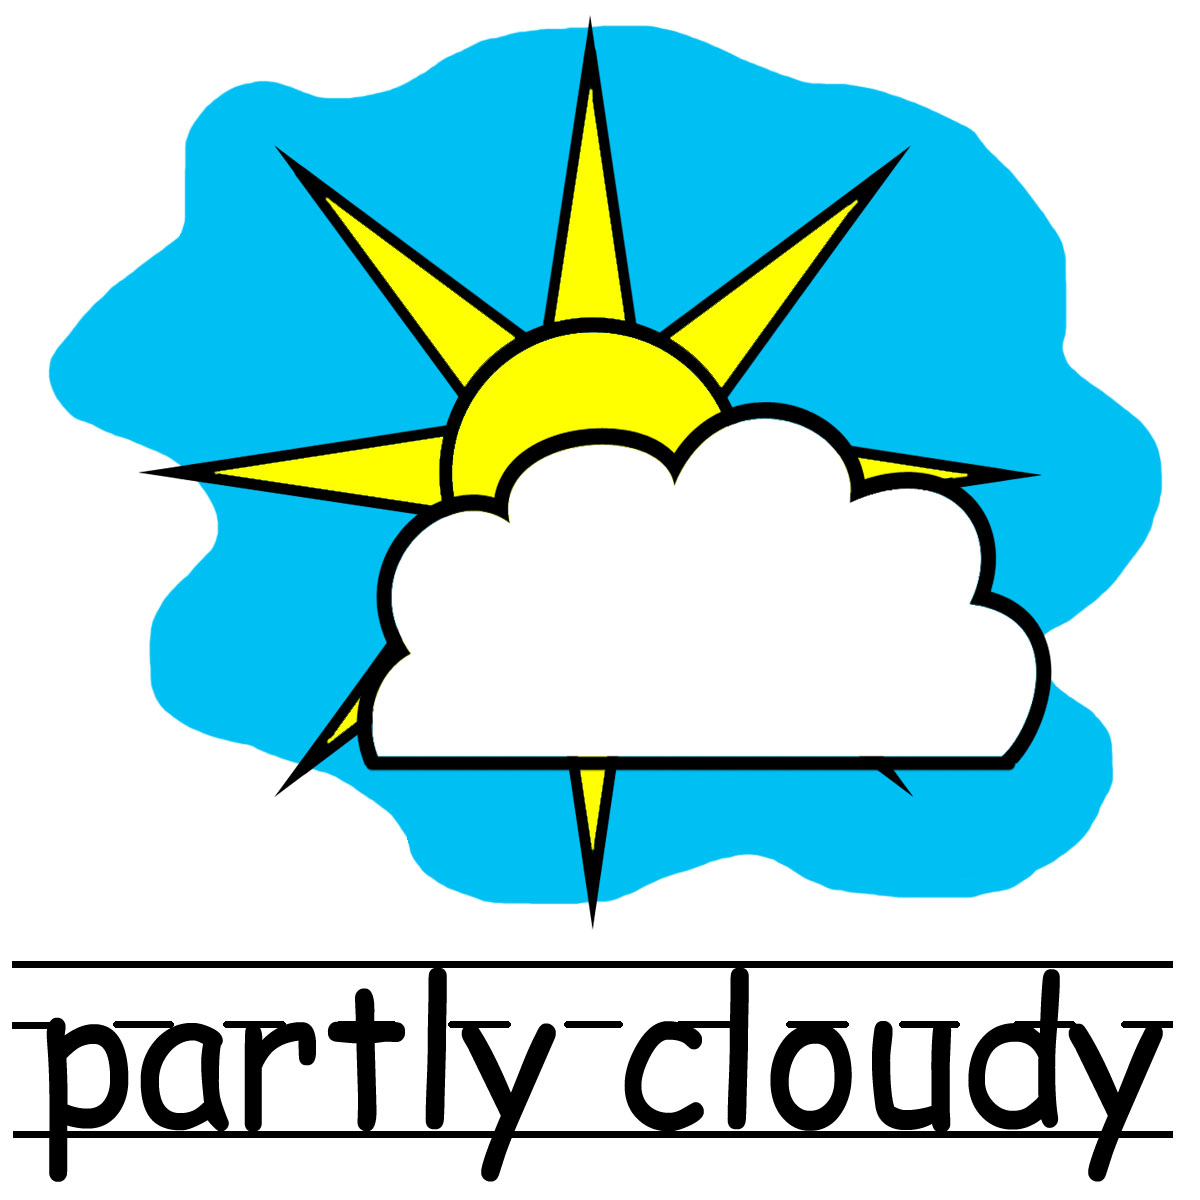 Weather Clip Art For Teachers | Clipart library - Free Clipart Images